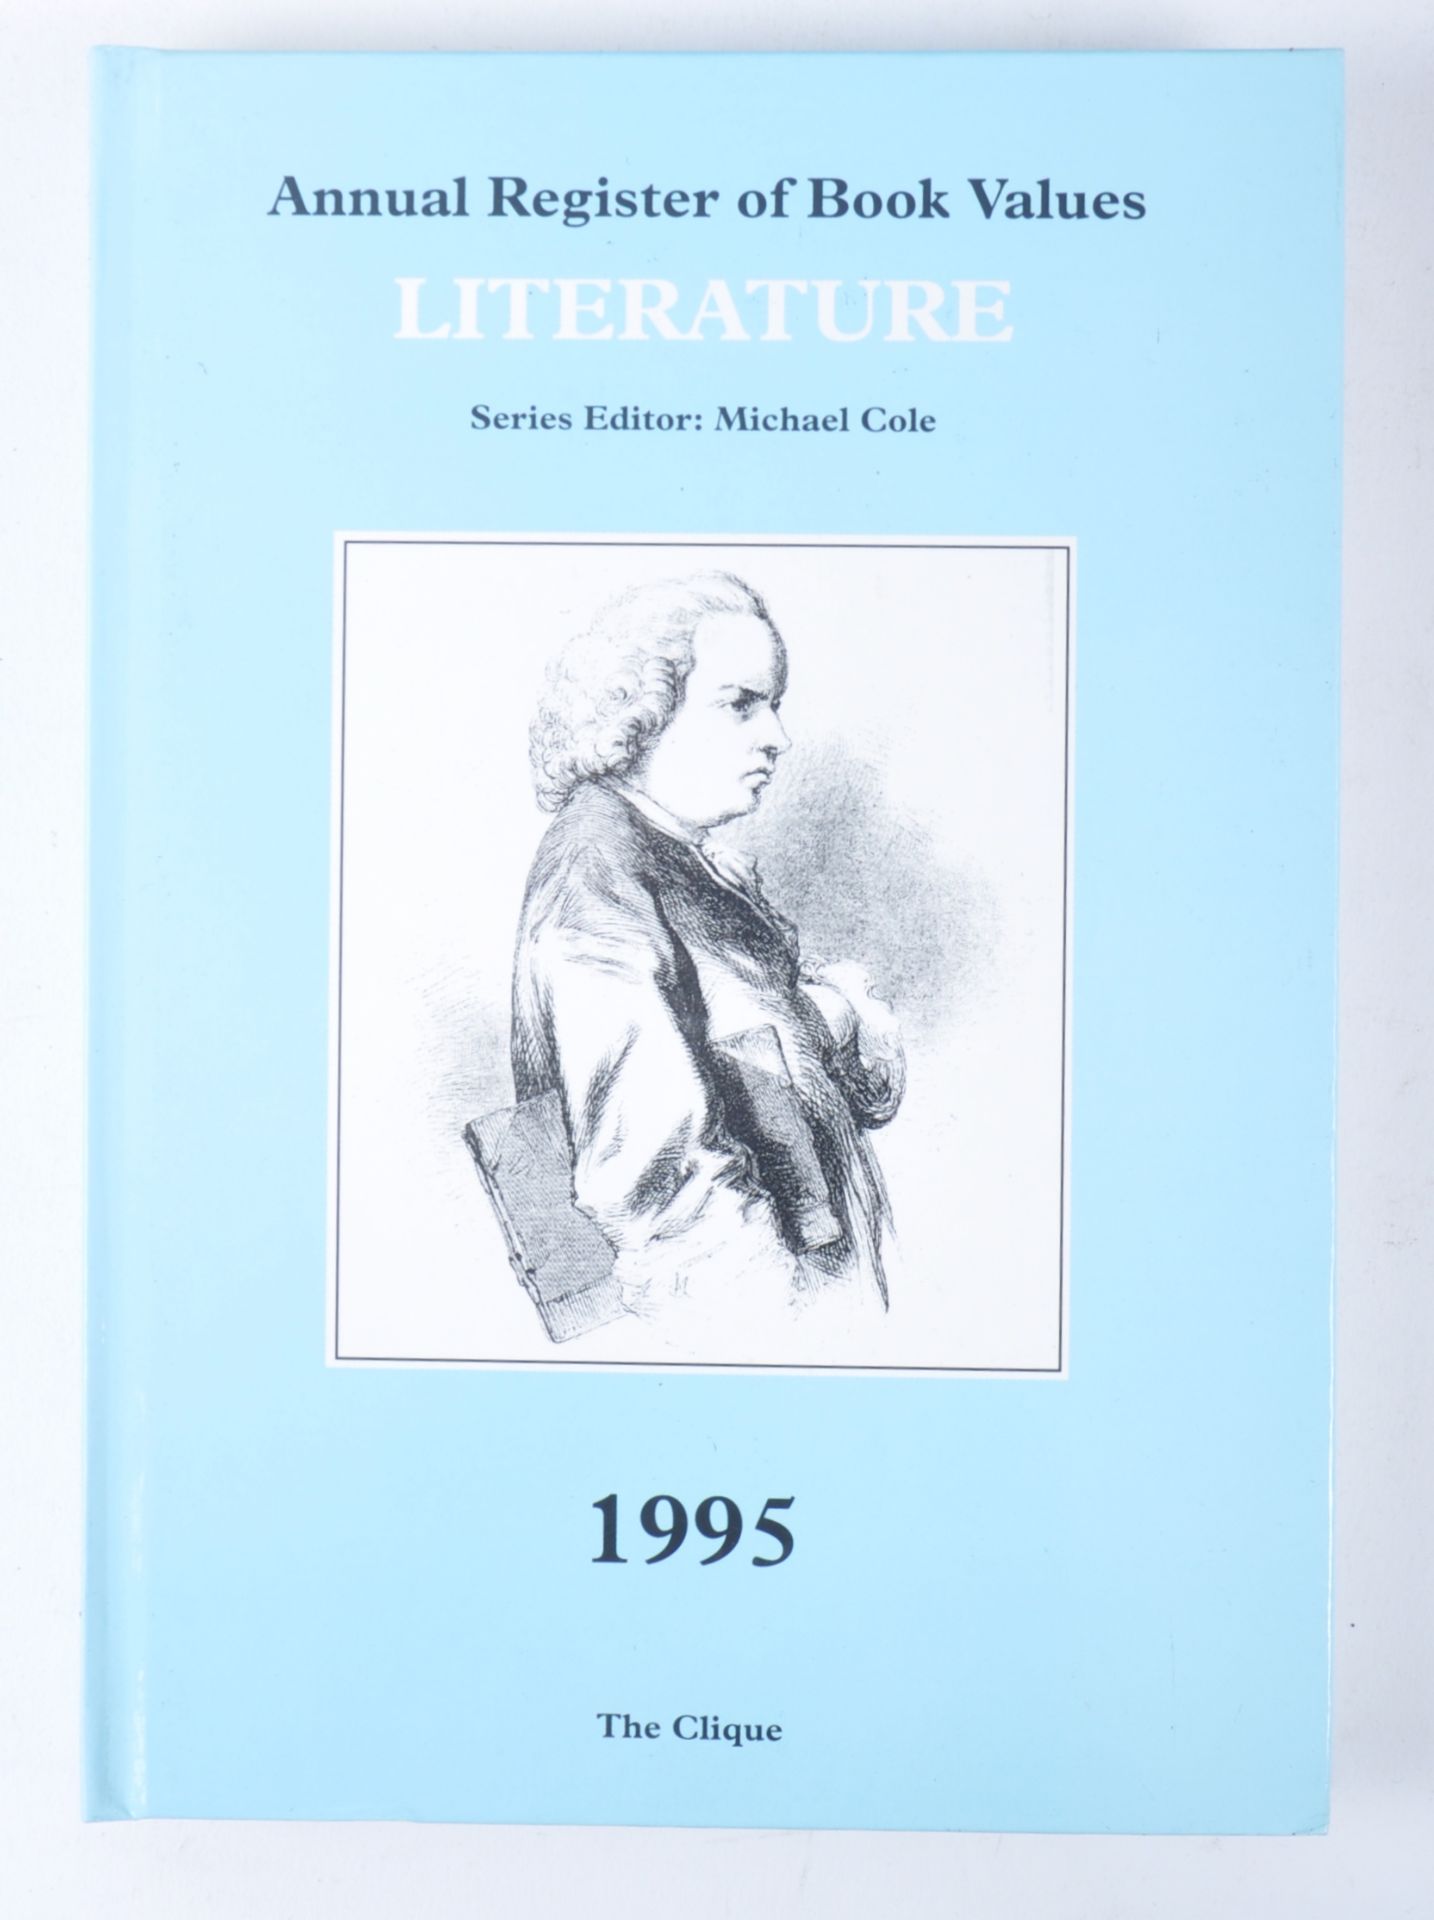 COLLECTION OF ANNUAL REGISTER OF BOOK VALUES - Image 7 of 8